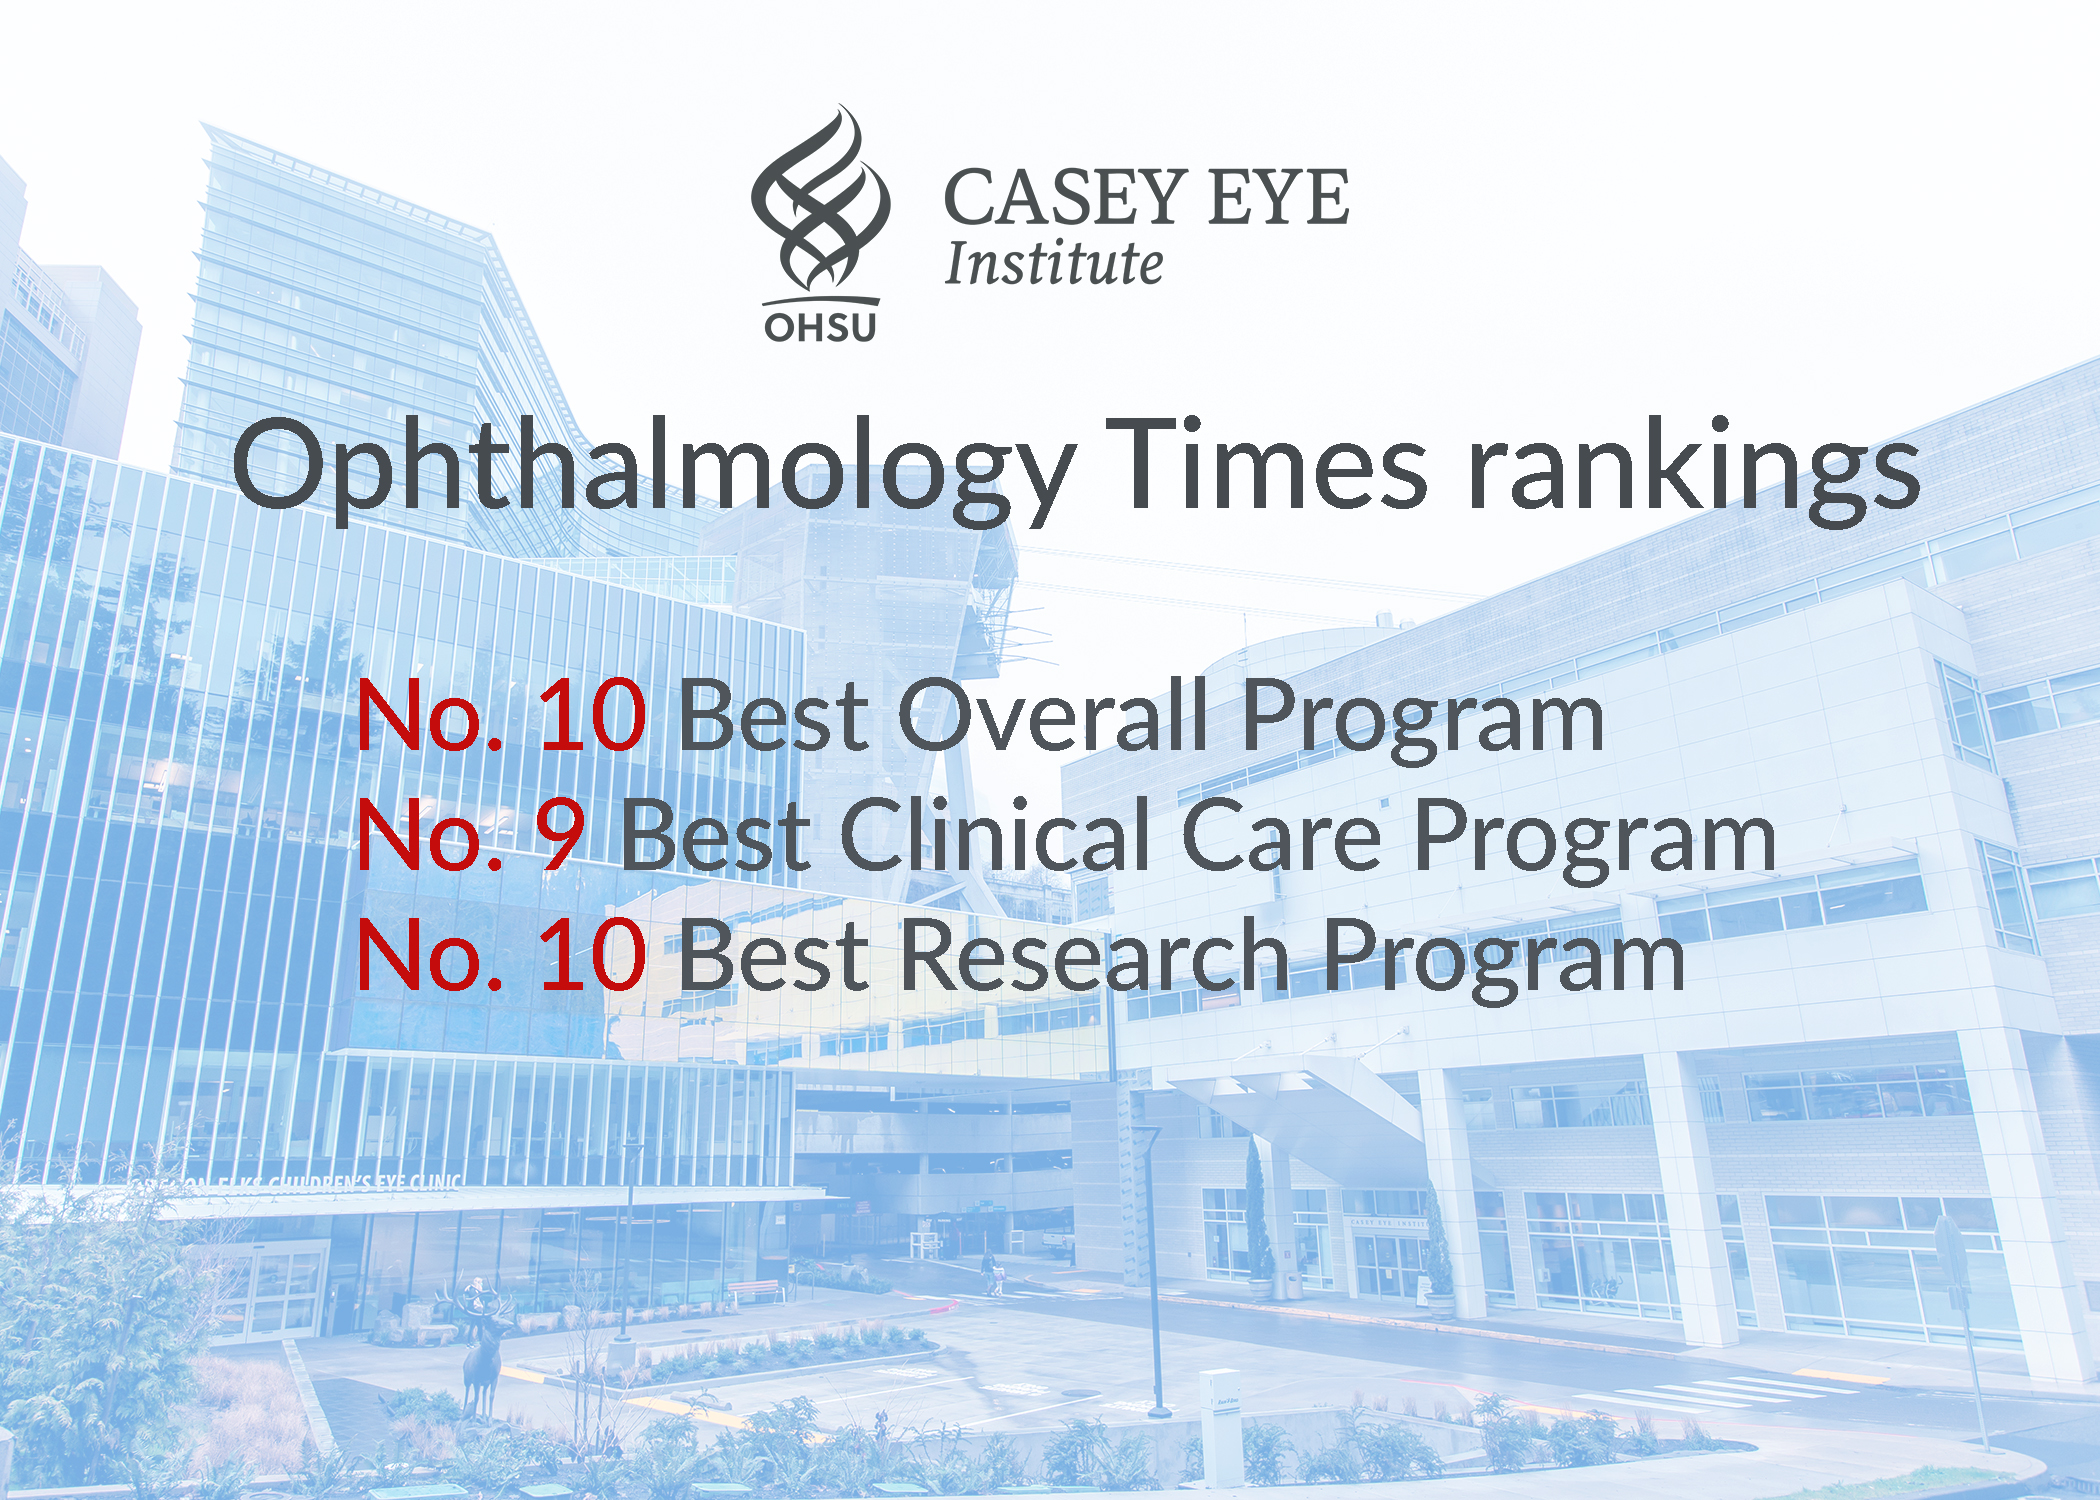 Casey's rankings list for 2021 Ophthalmology Times Best Program survey